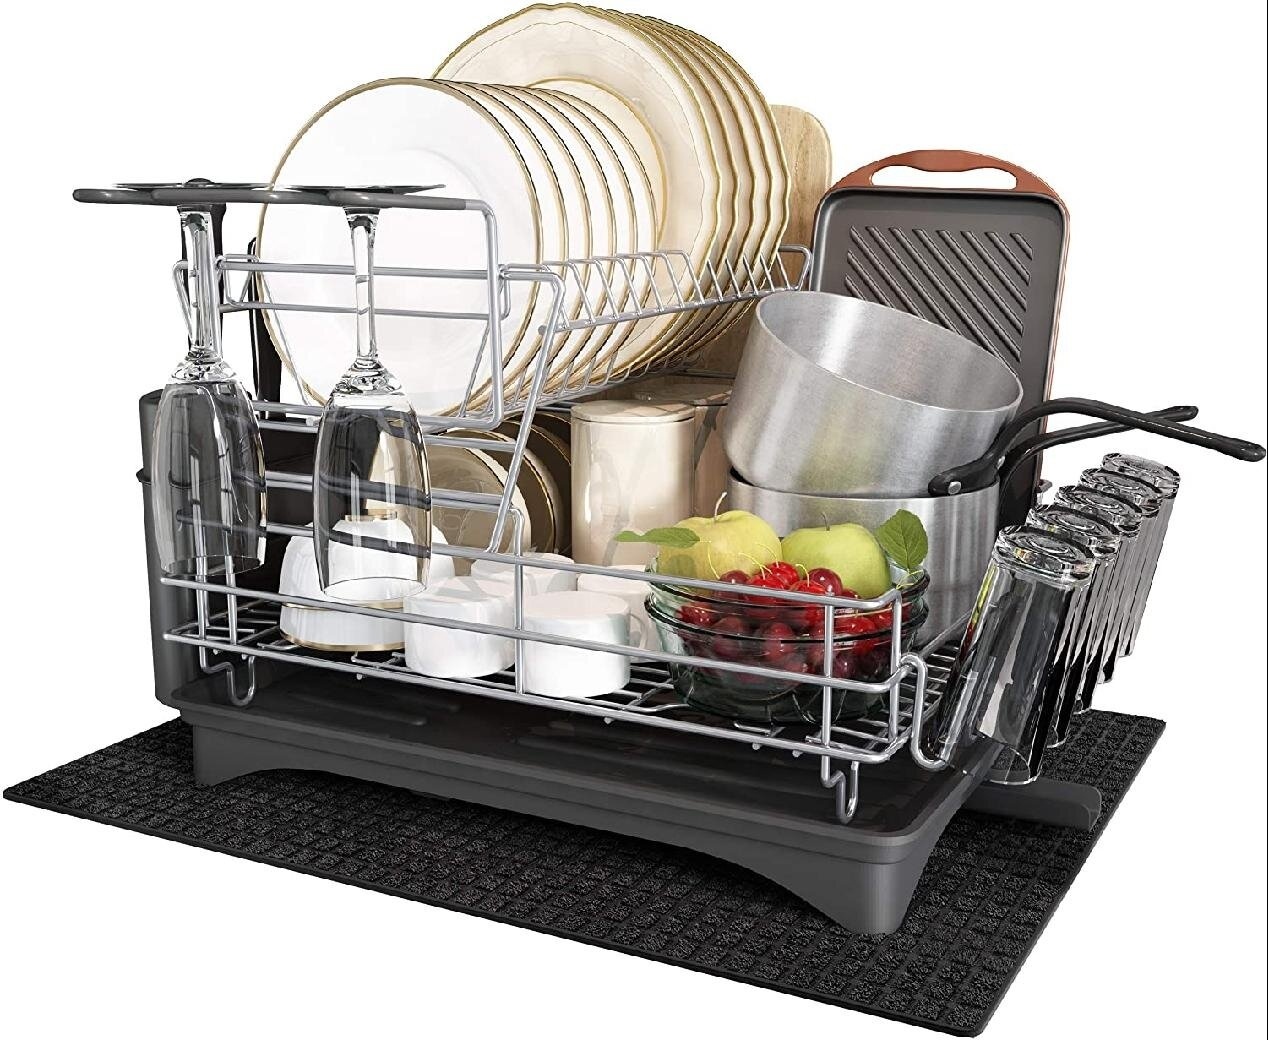 https://visualhunt.com/photos/23/large-drying-stainless-steel-dish-rack.jpg